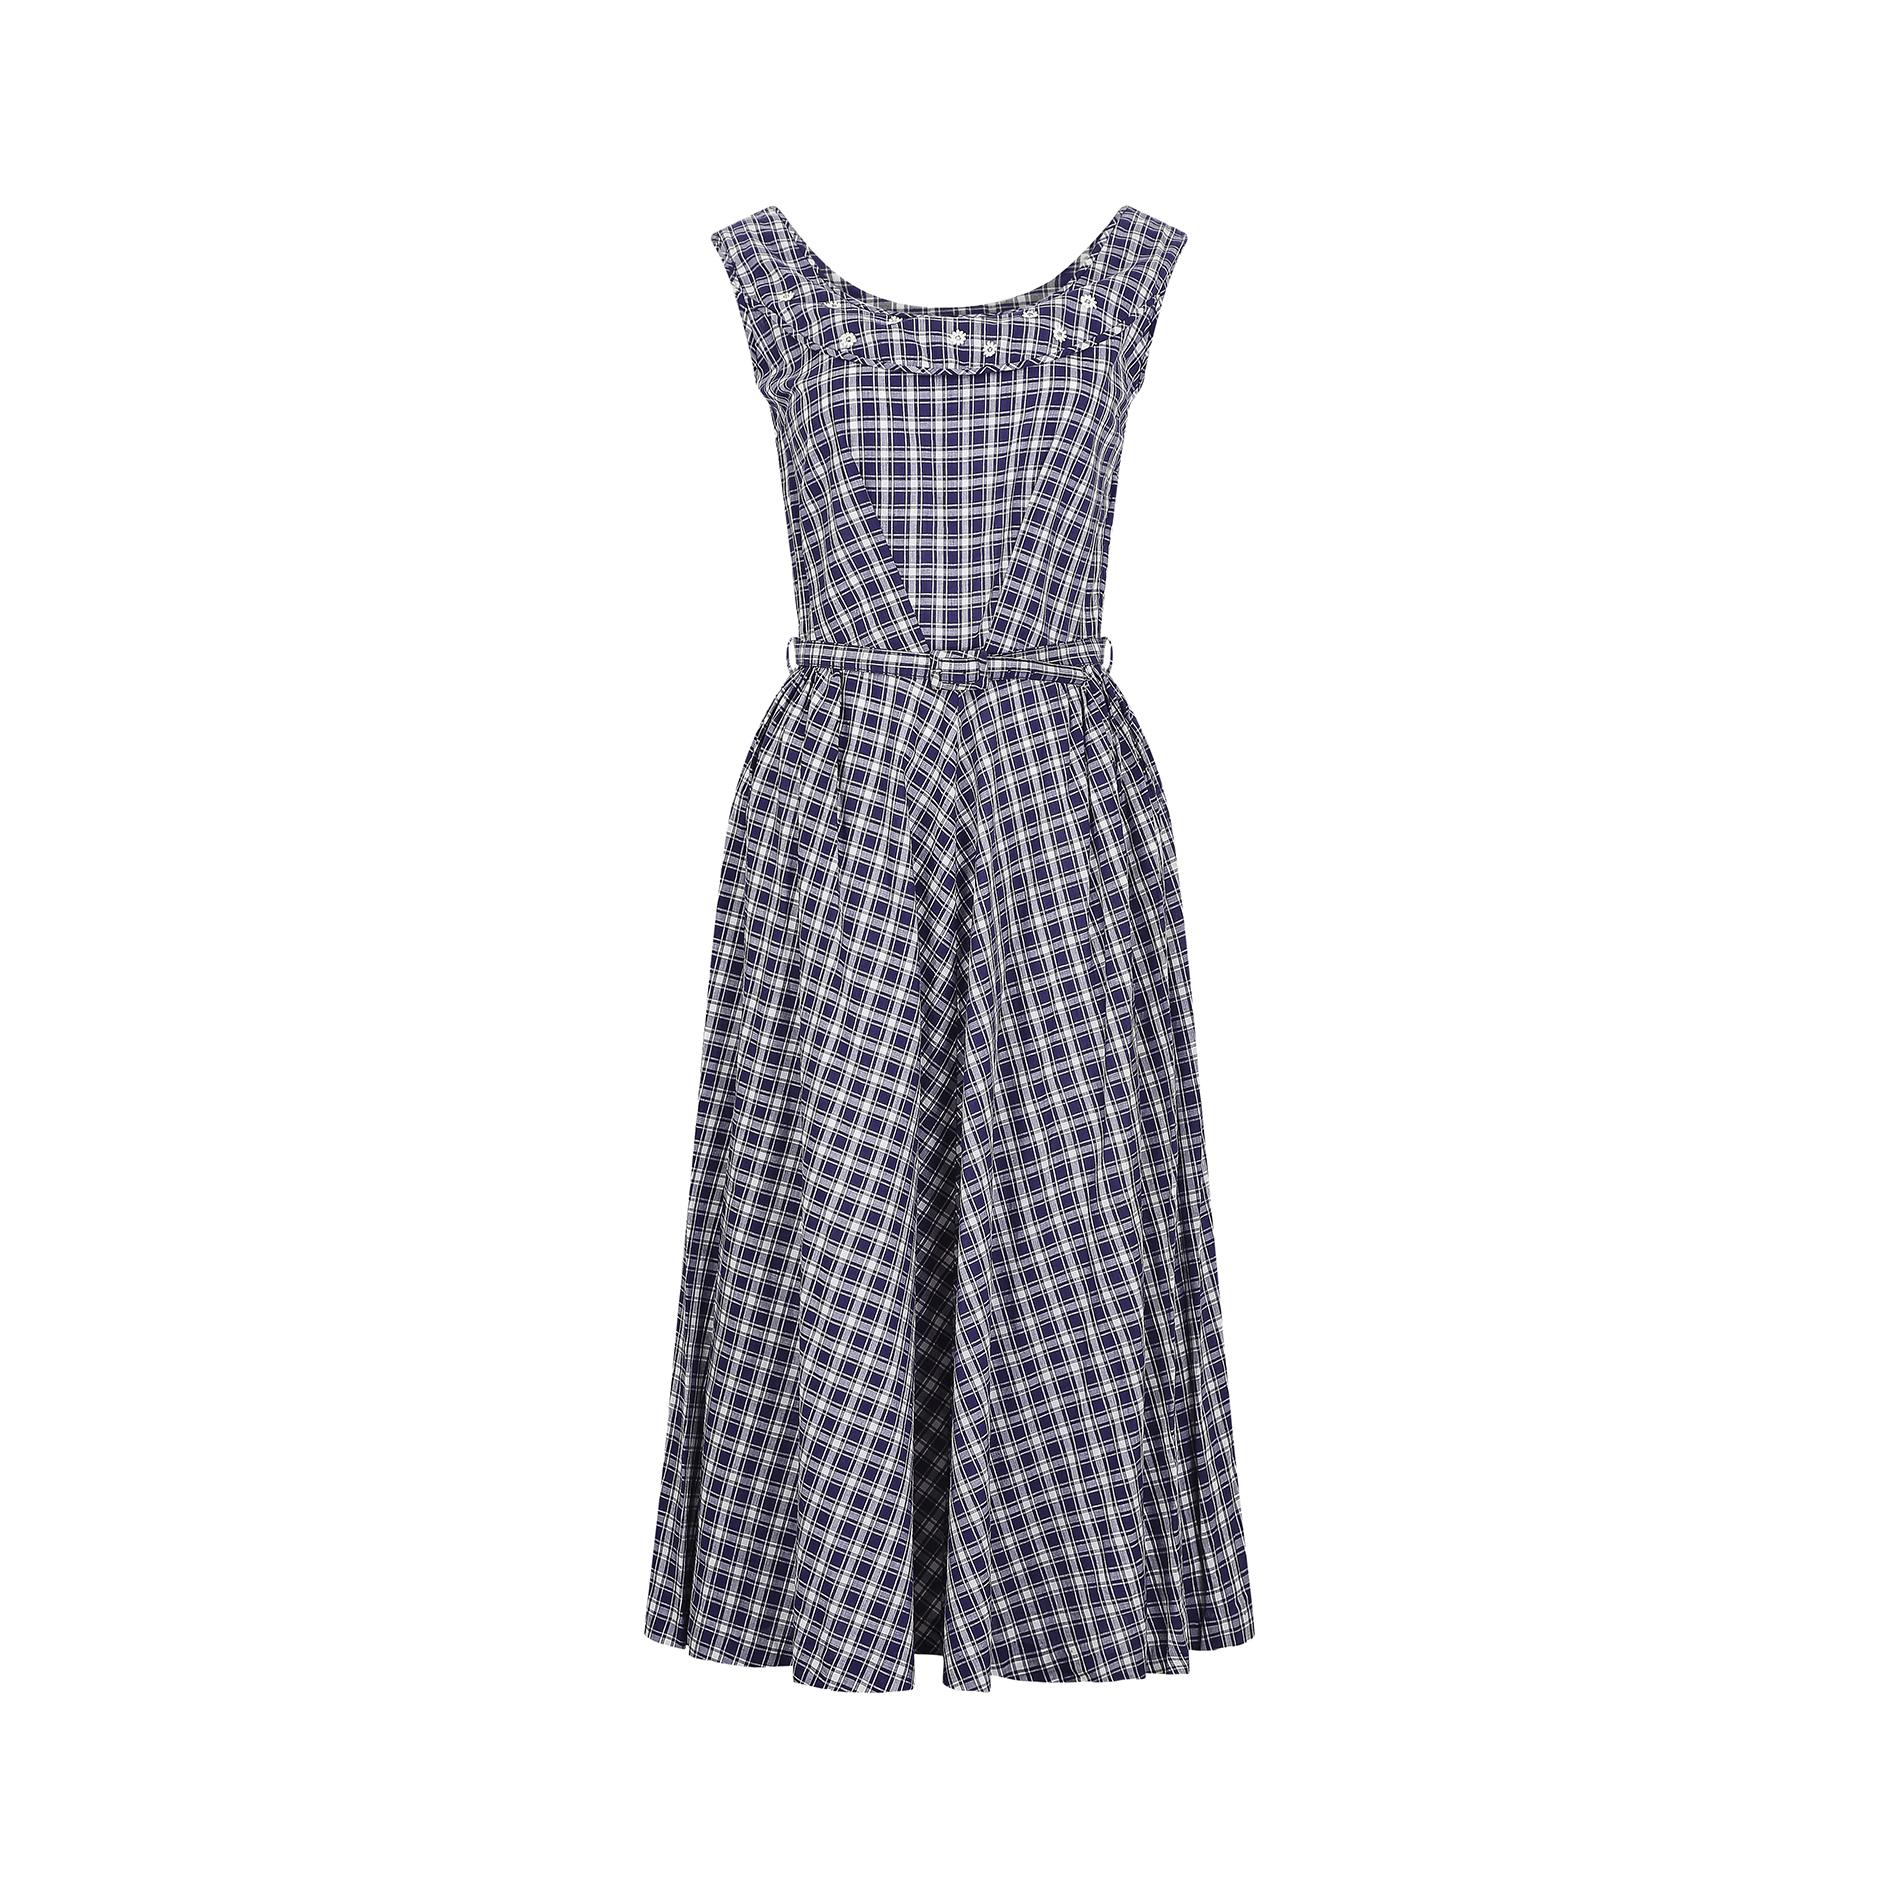 Late 1950s - early 1960s blue and white gingham cotton dress. It has a rounded neckline with an embroidered front yoke, complete with tiny white lace flower detail, each with a small diamante at its centre. The front of the dress is cut in a V